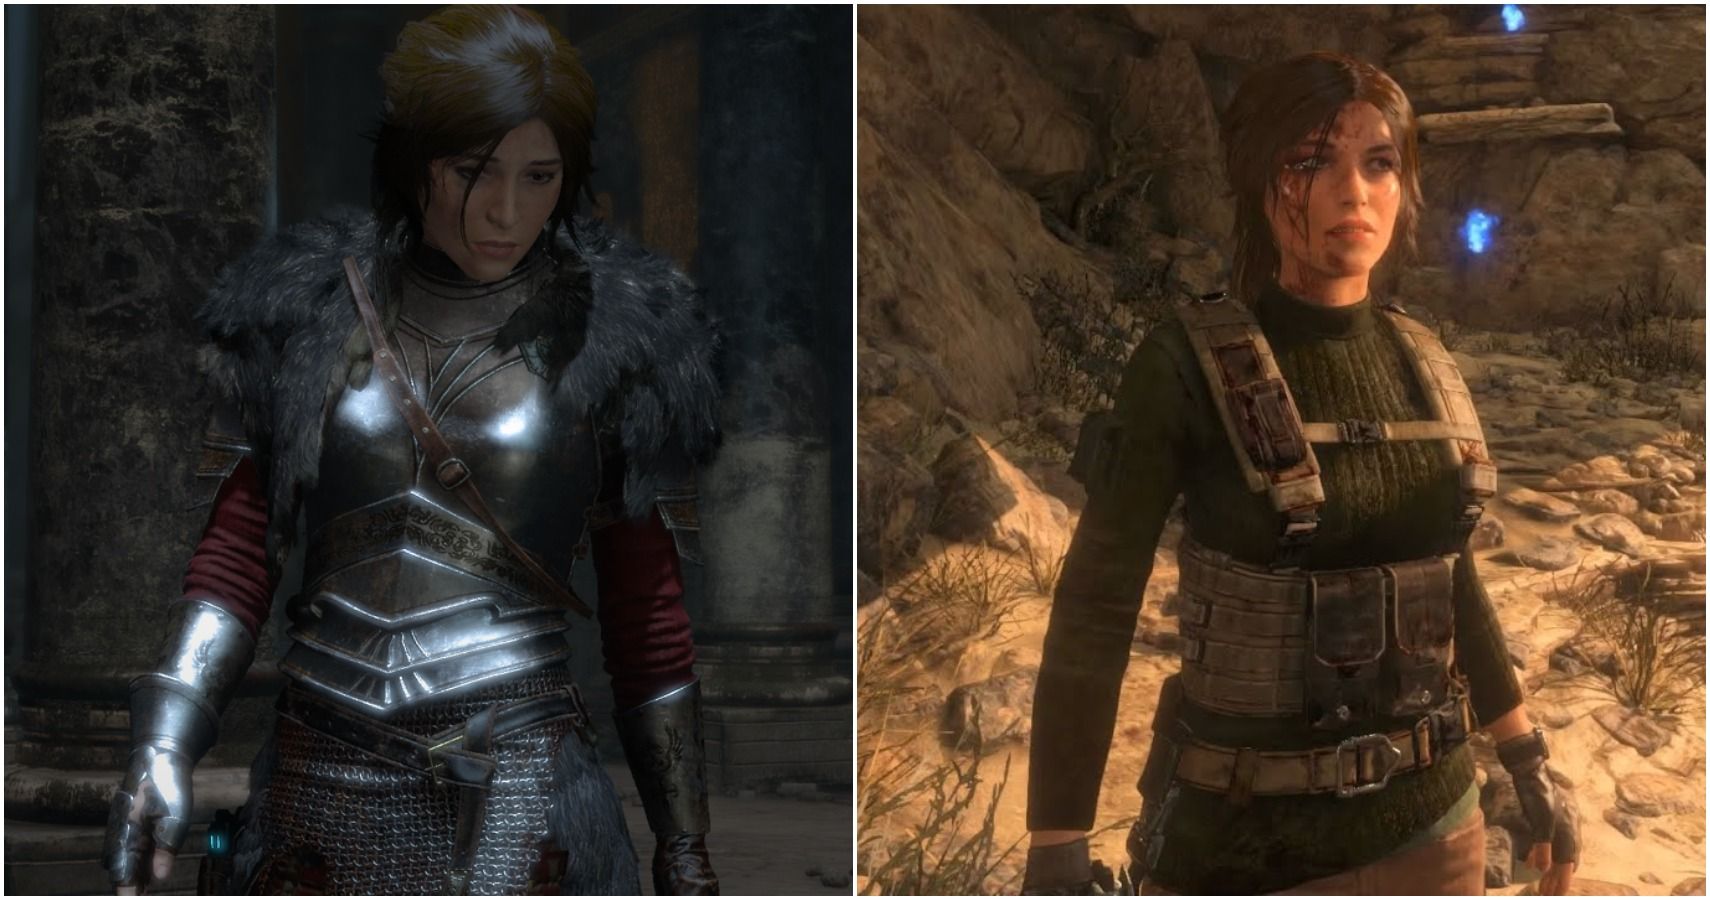 rise of the tomb raider salvage